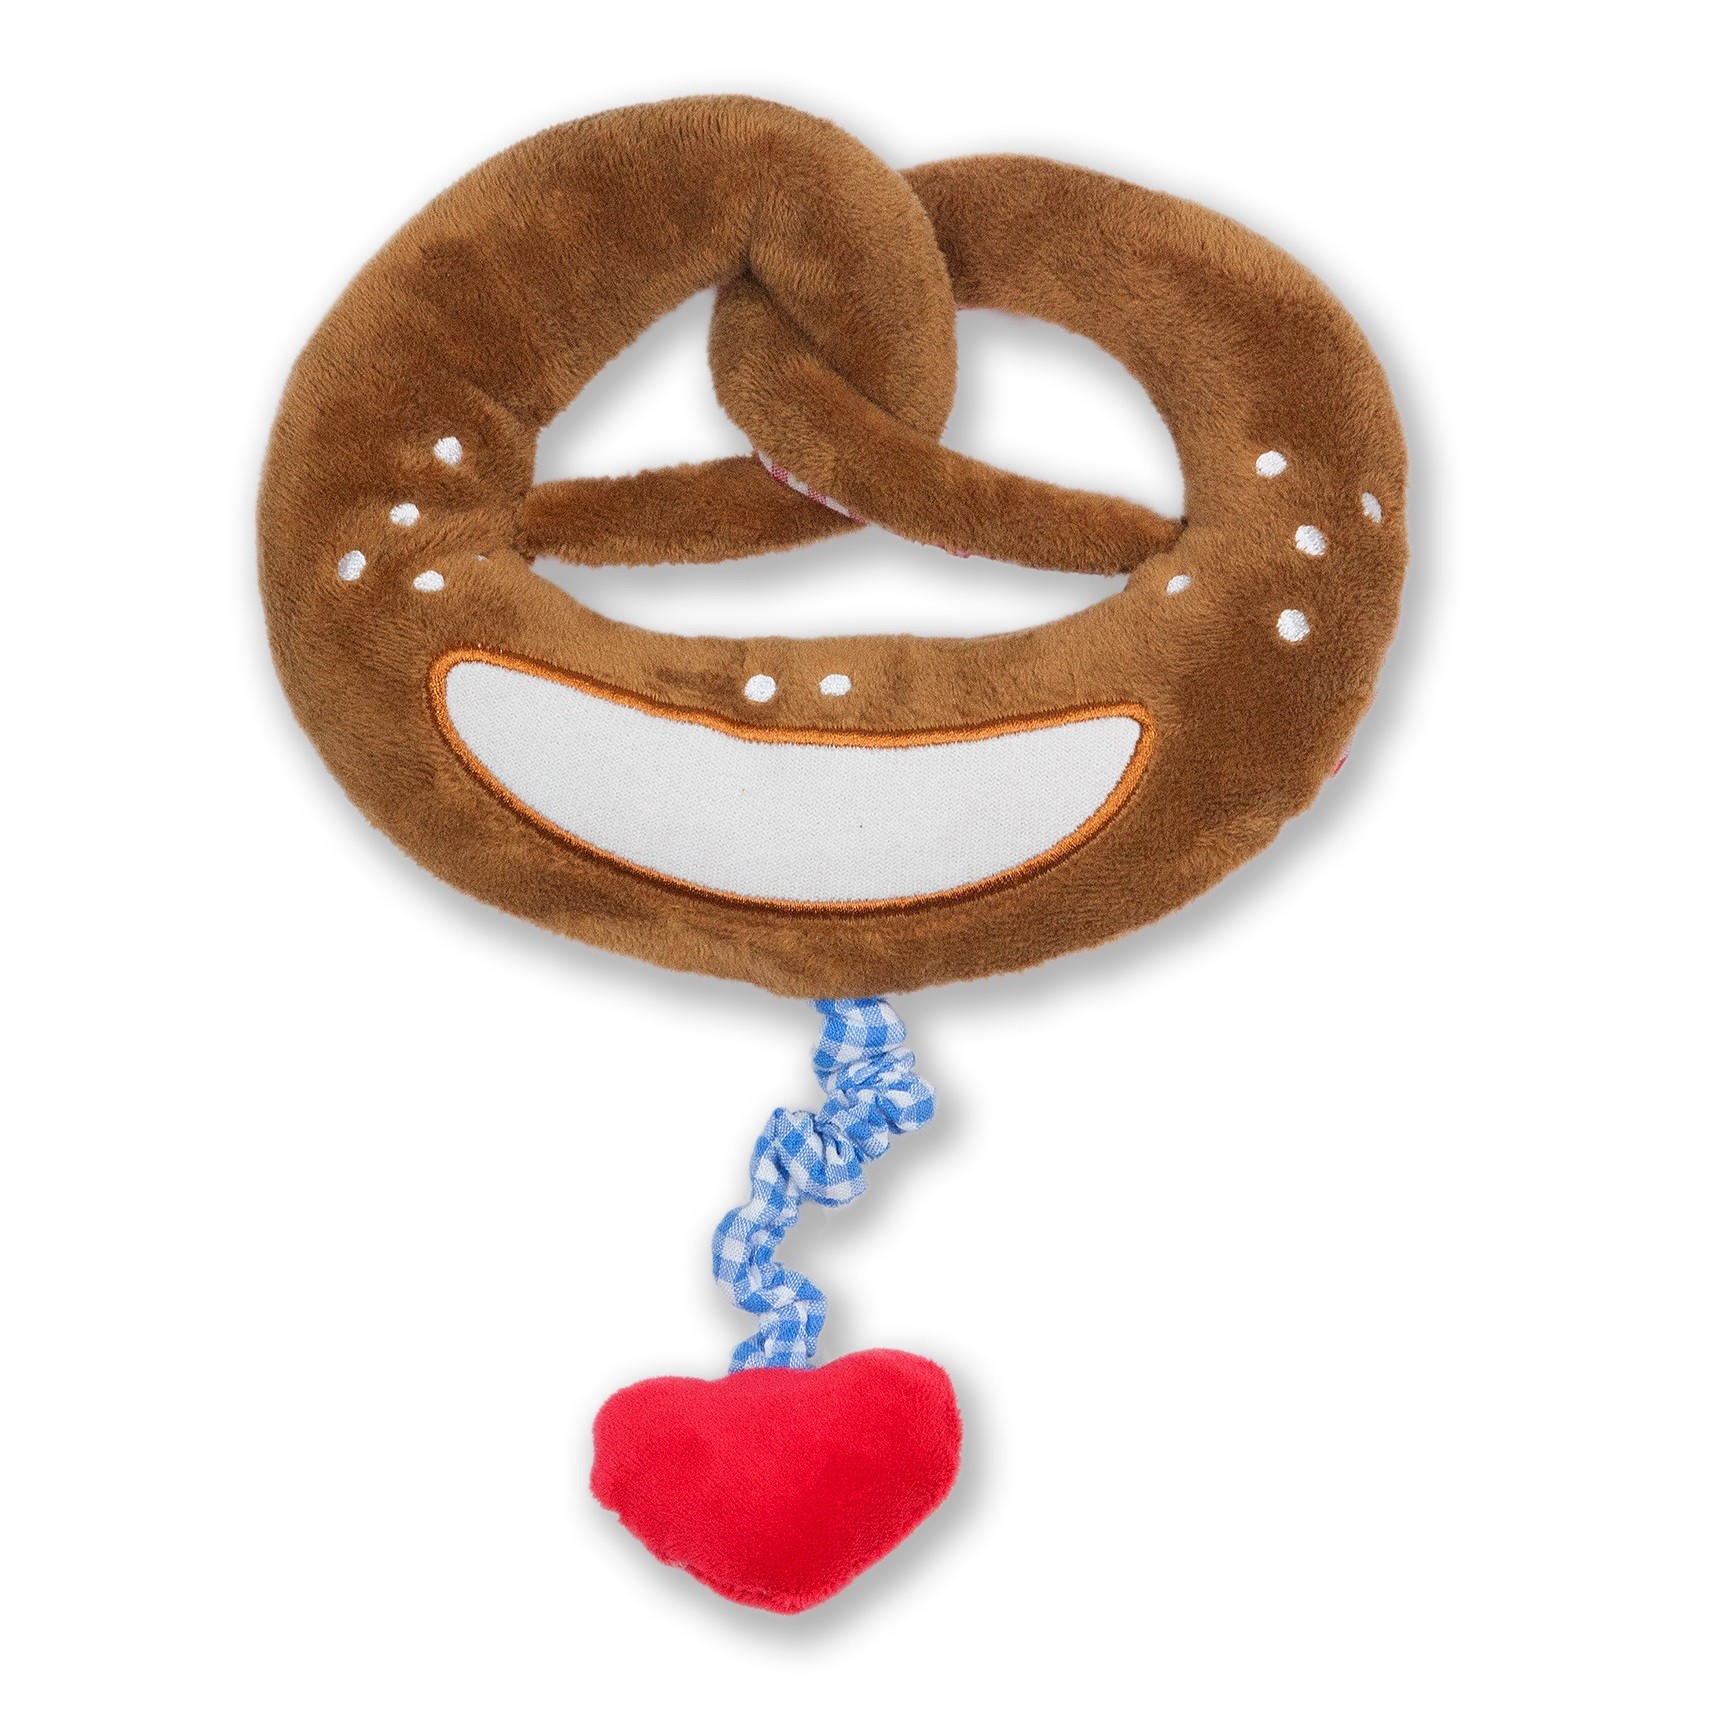 Nyani - Pretzel as a music box with heart